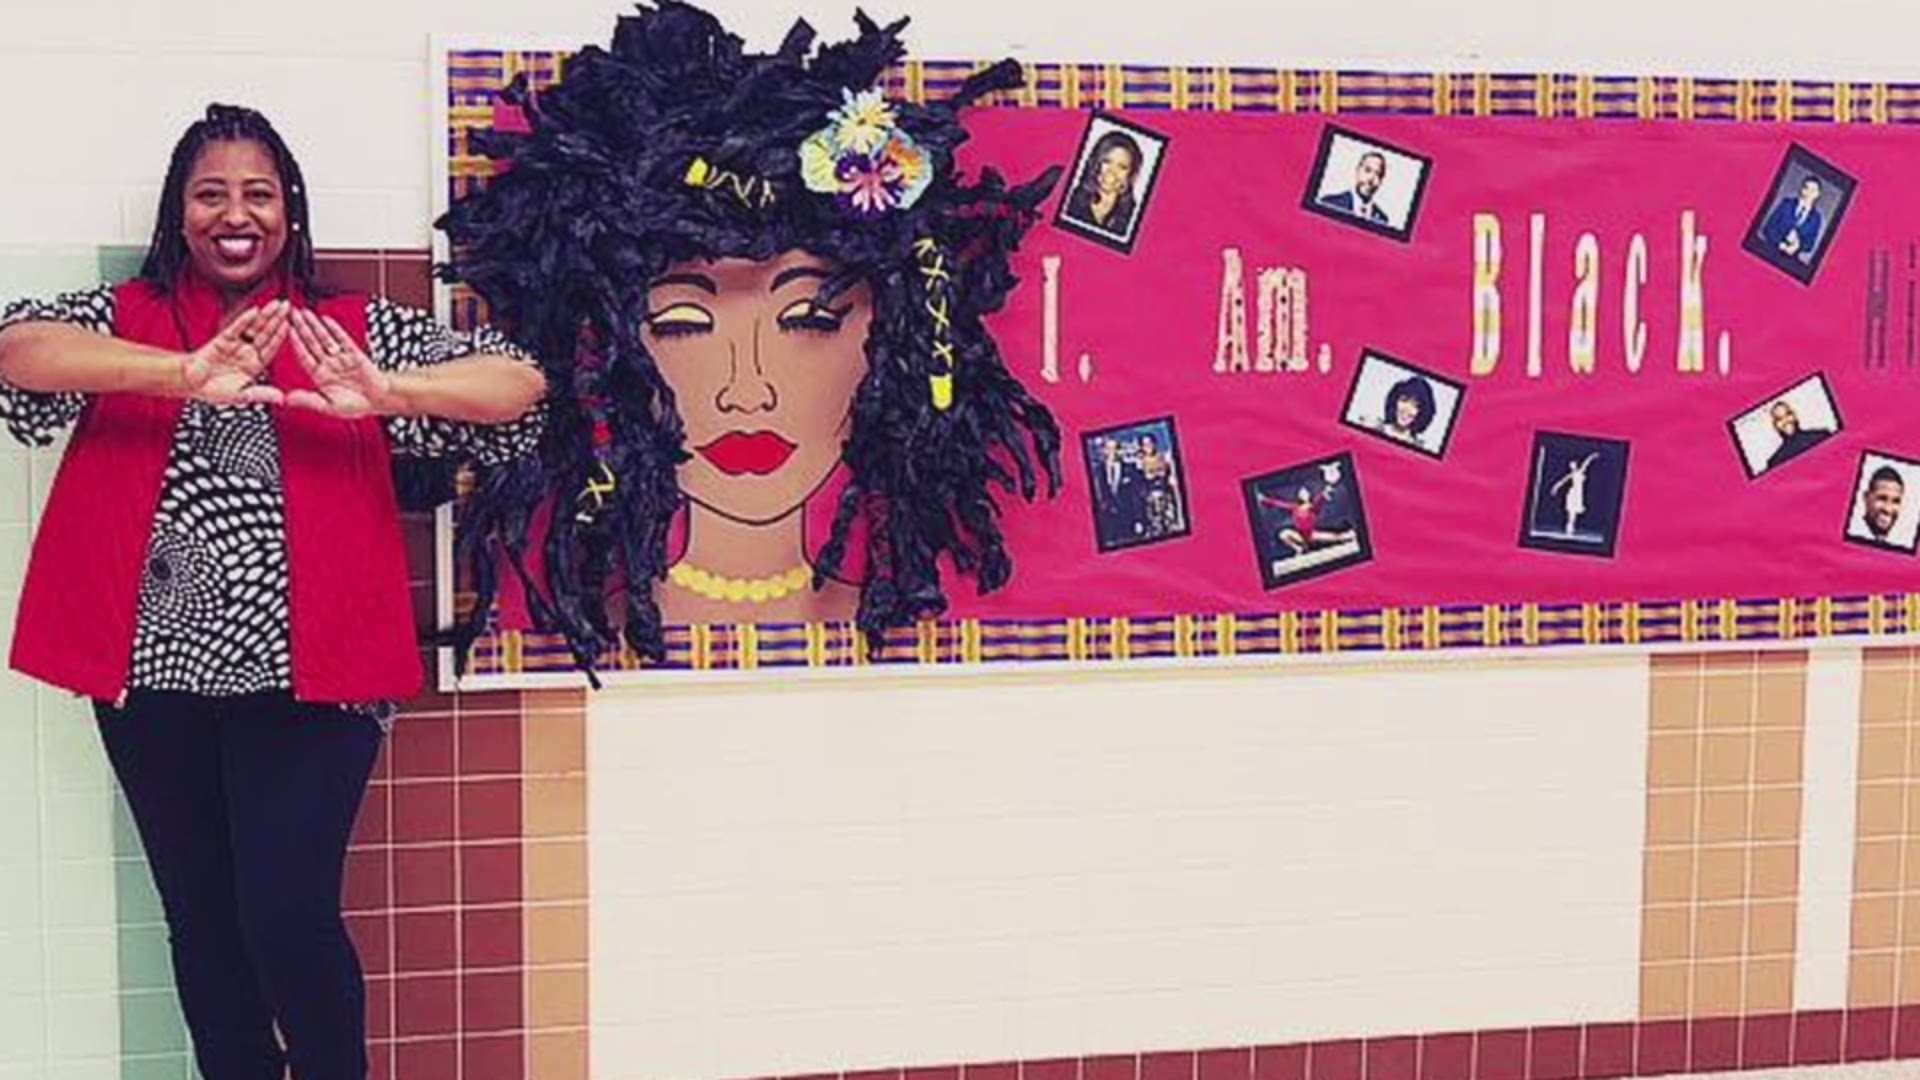 Shay Duncan shared these photos of incredible displays at Western Branch Middle School in Chesapeake to commemorate Black History Month.